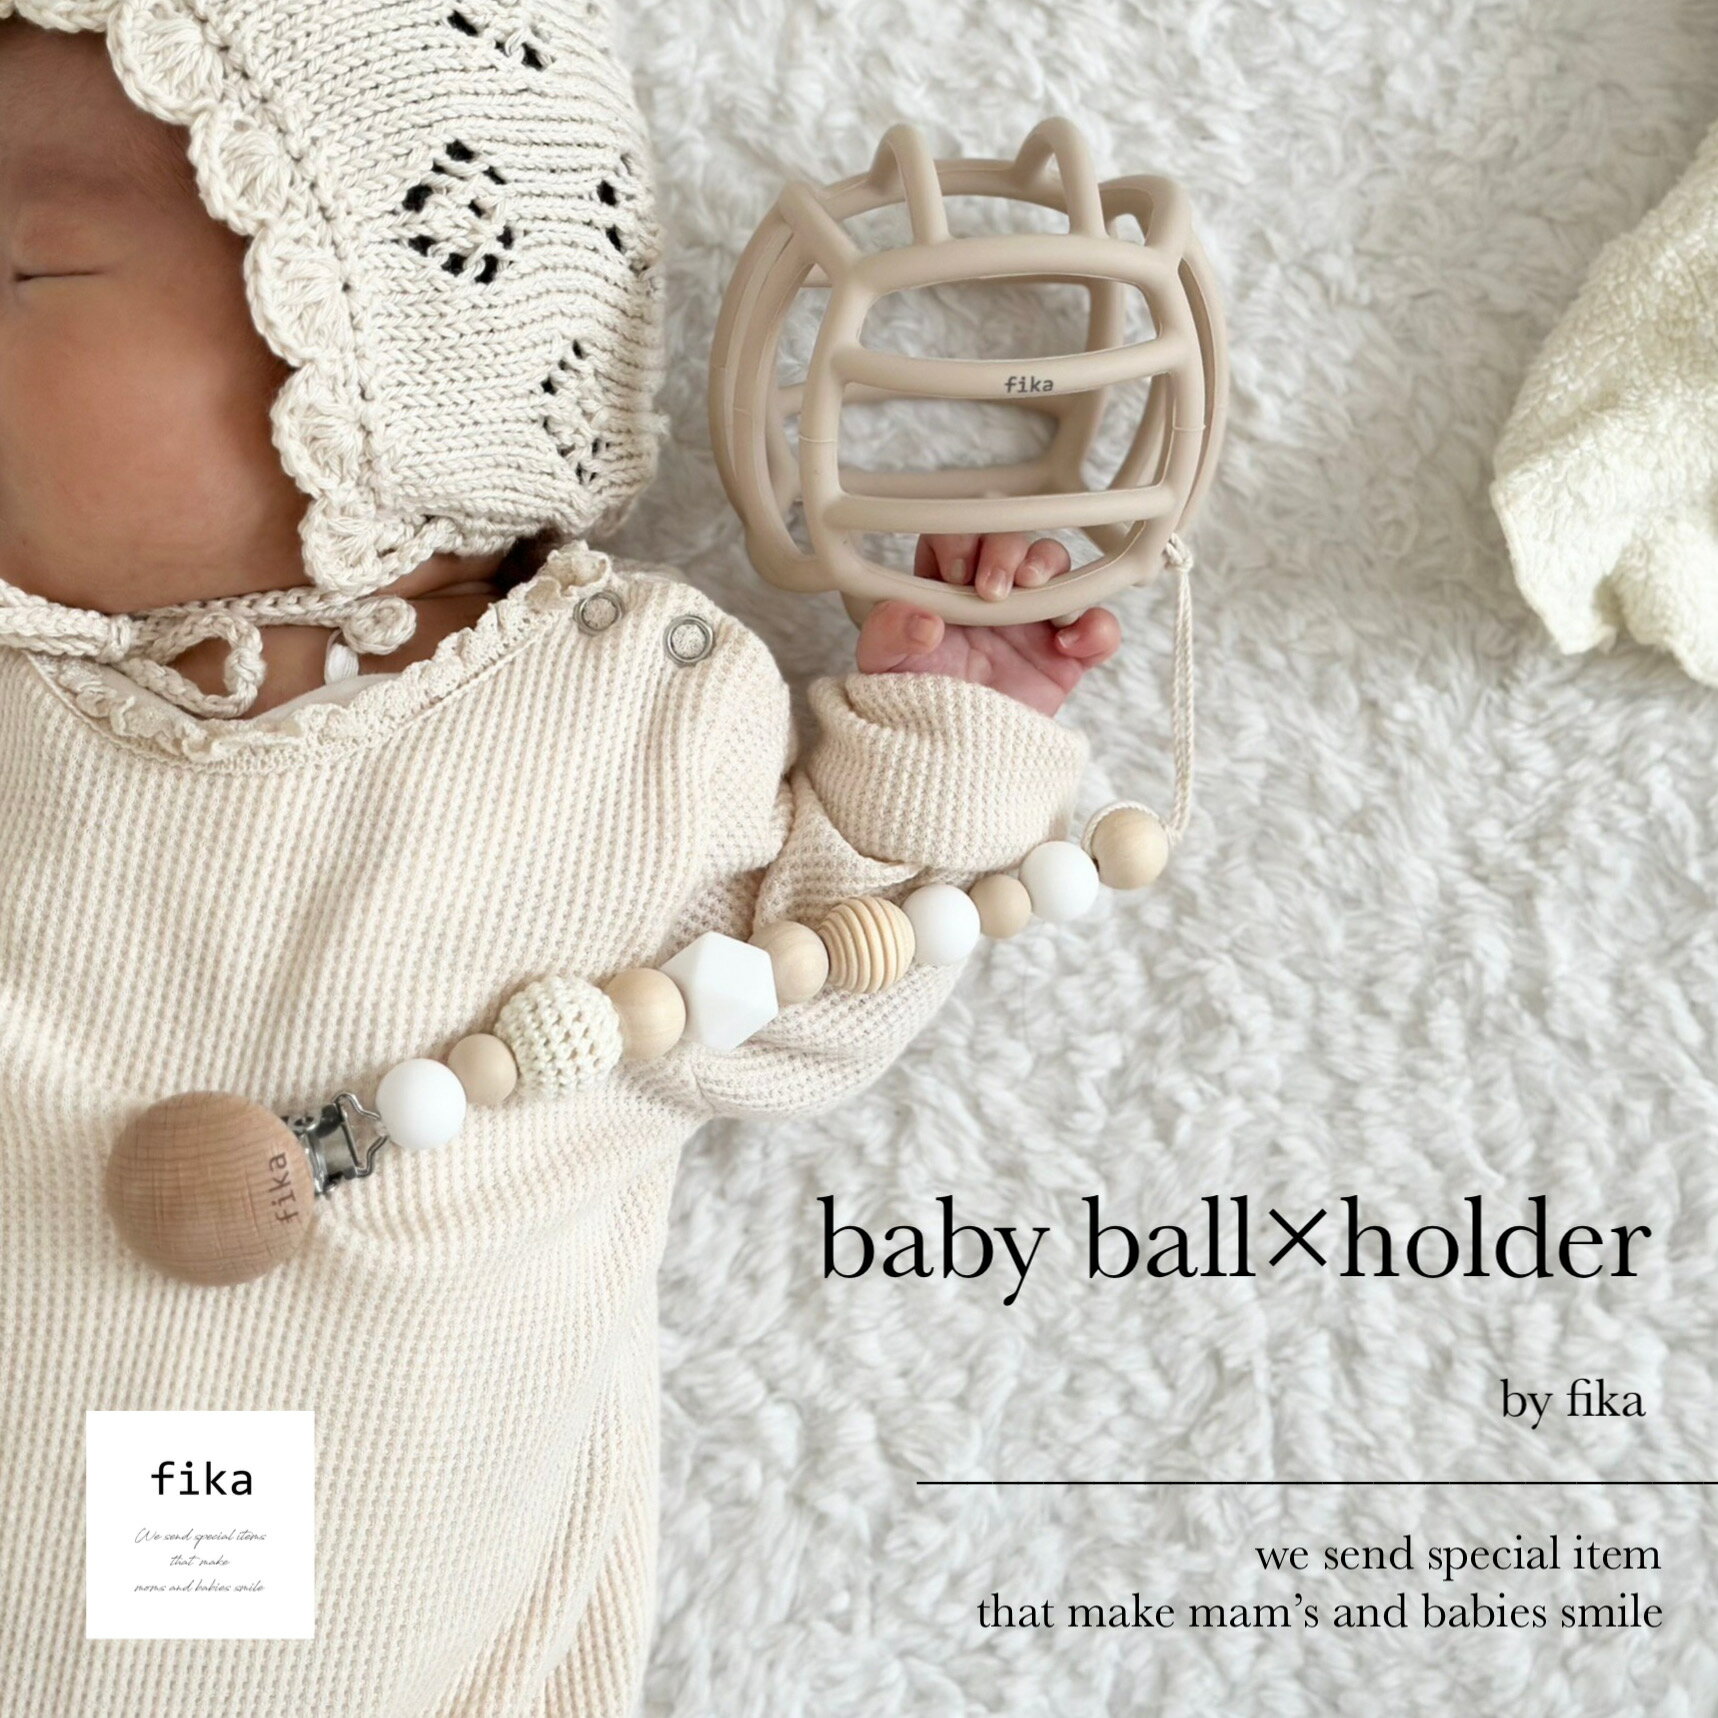 fika baby ball ×holder　セット　ギフト